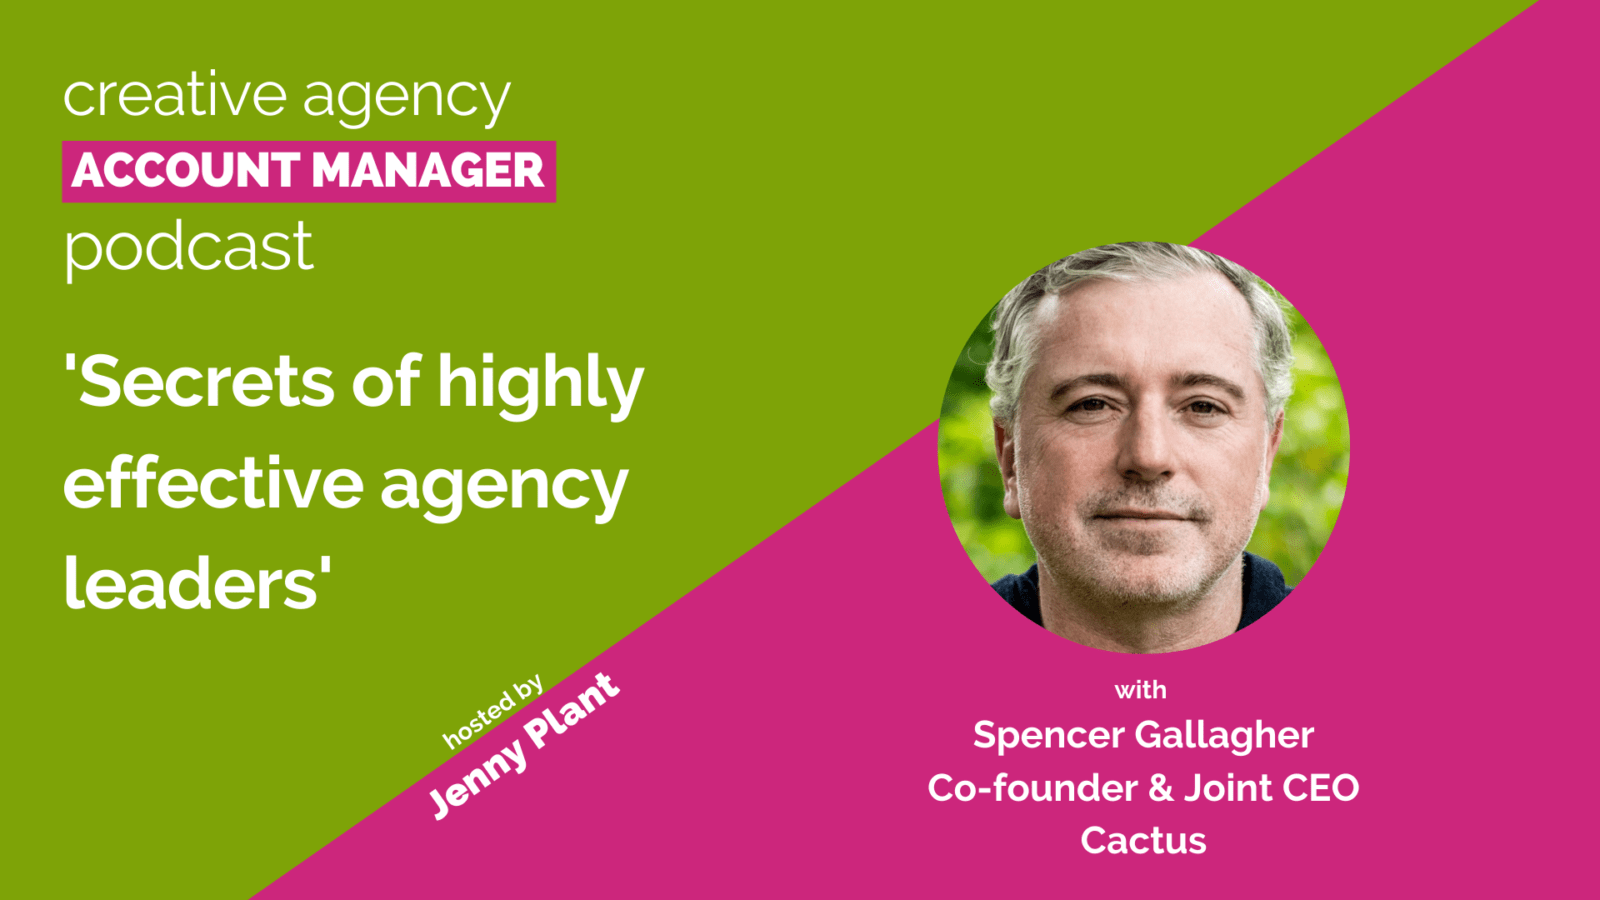 Secrets of highly effective agency leaders